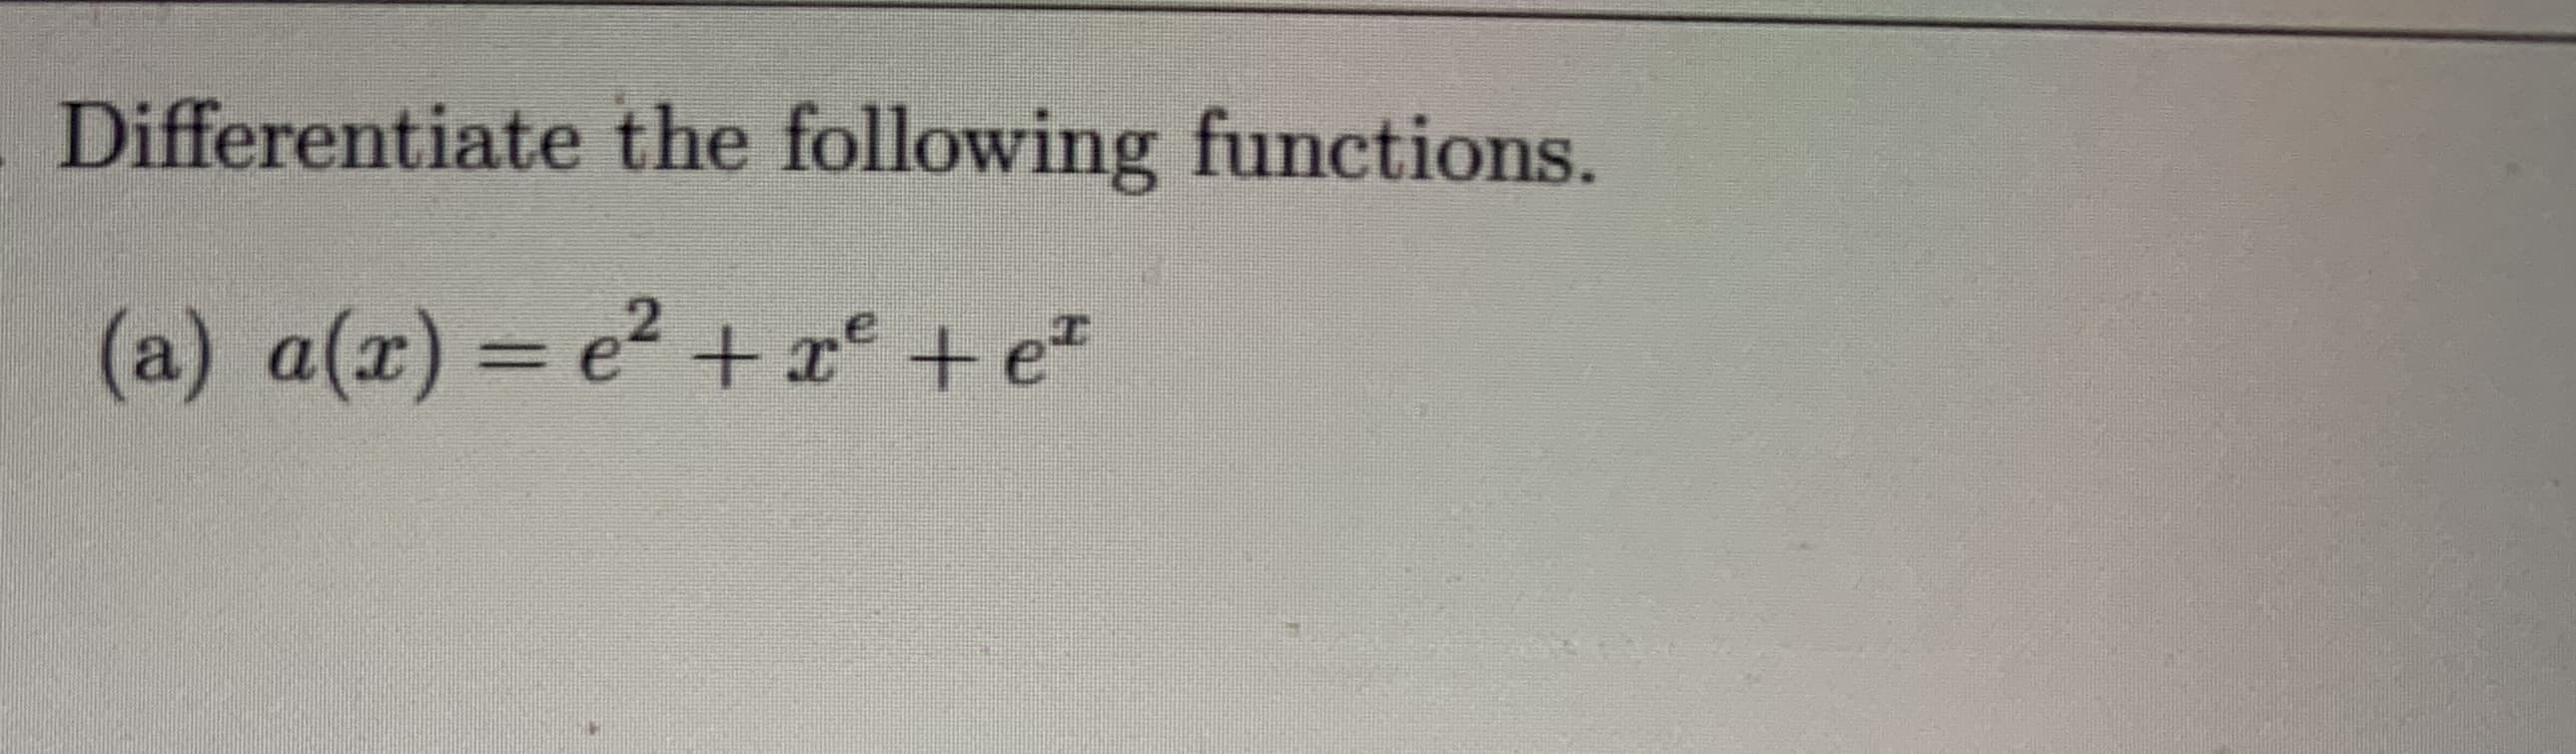 Differentiate the following functions.
(a) a(x) = e2 +x° + e*
